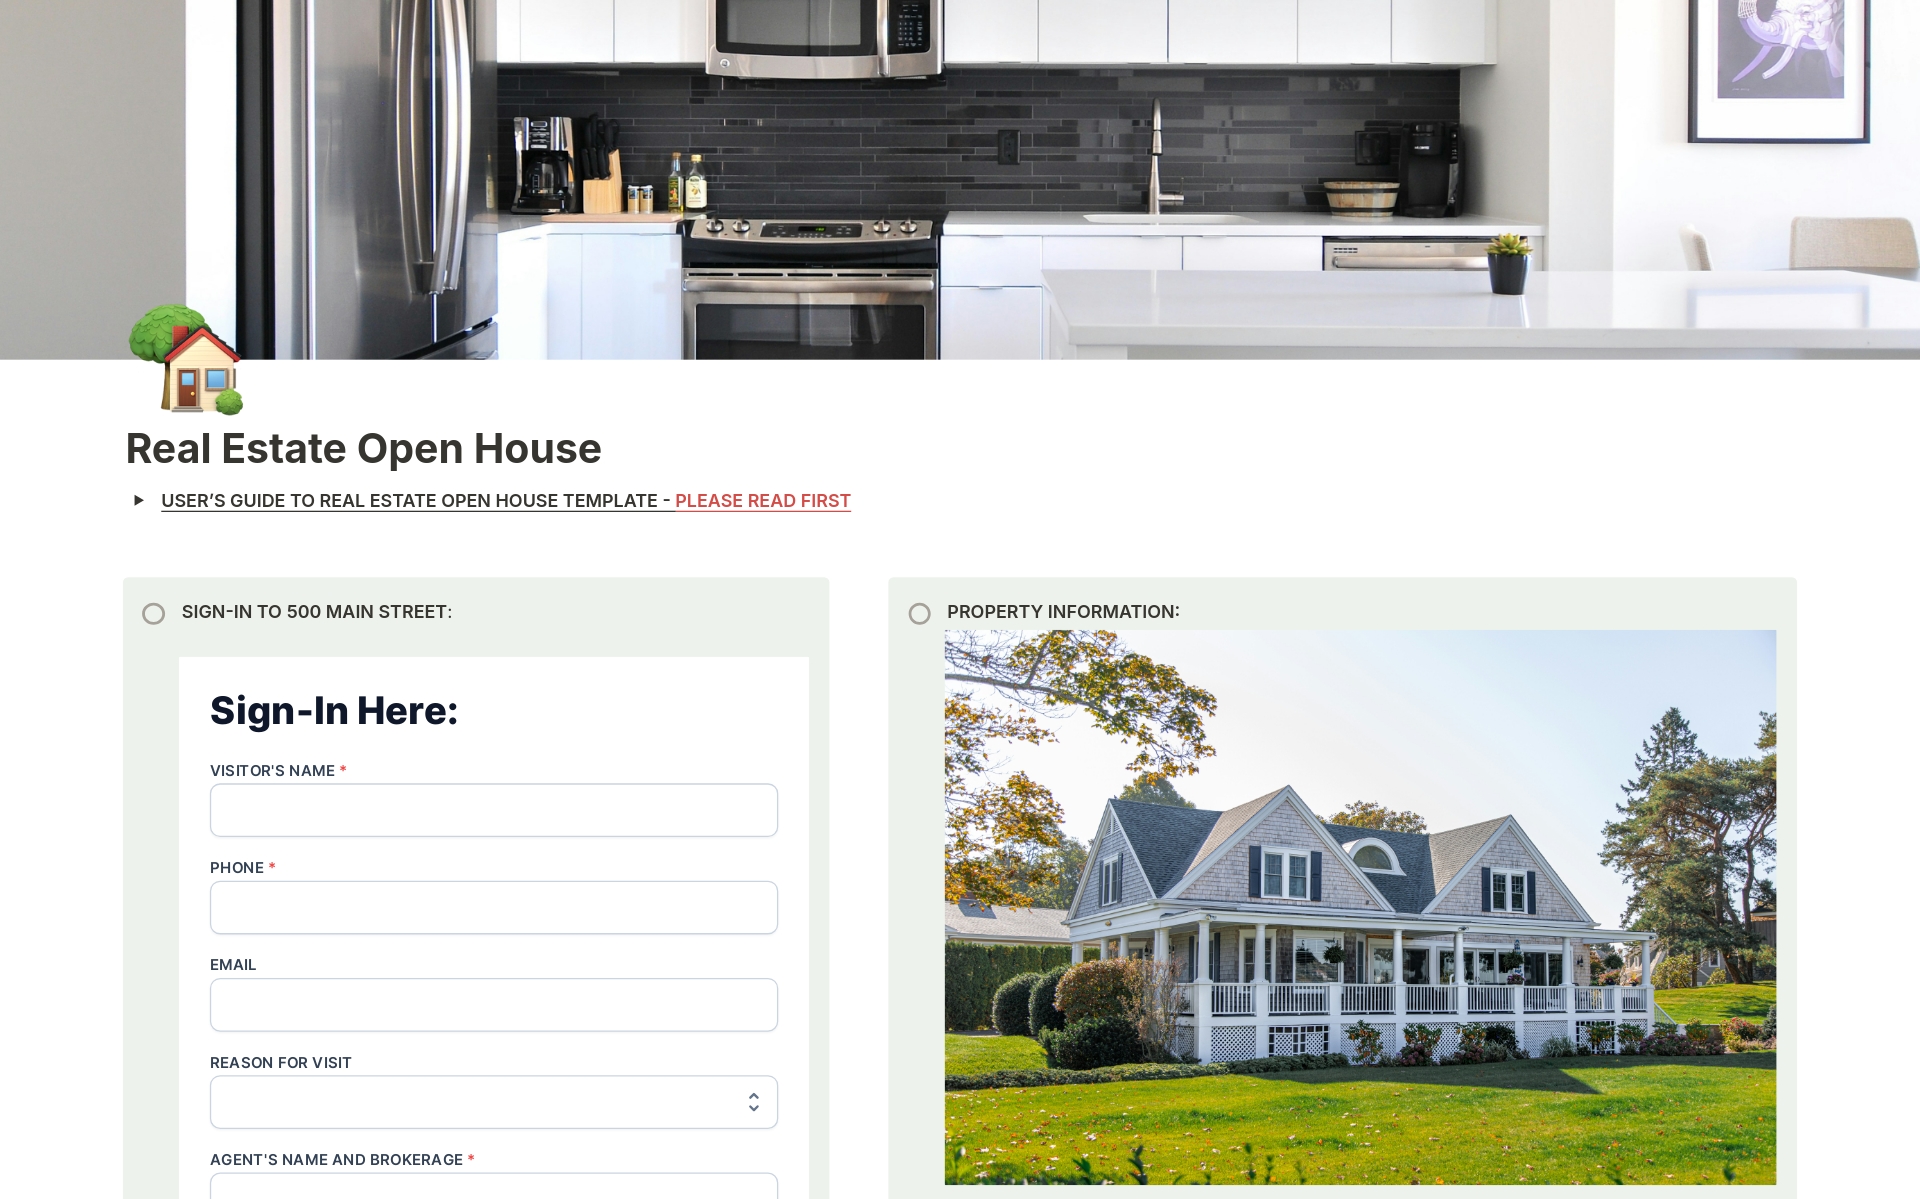 Our Real Estate Open House Sign-In Template for Notion is designed to streamline your open house events, making it easier than ever to capture and manage visitor information ELECTRONICALLY.